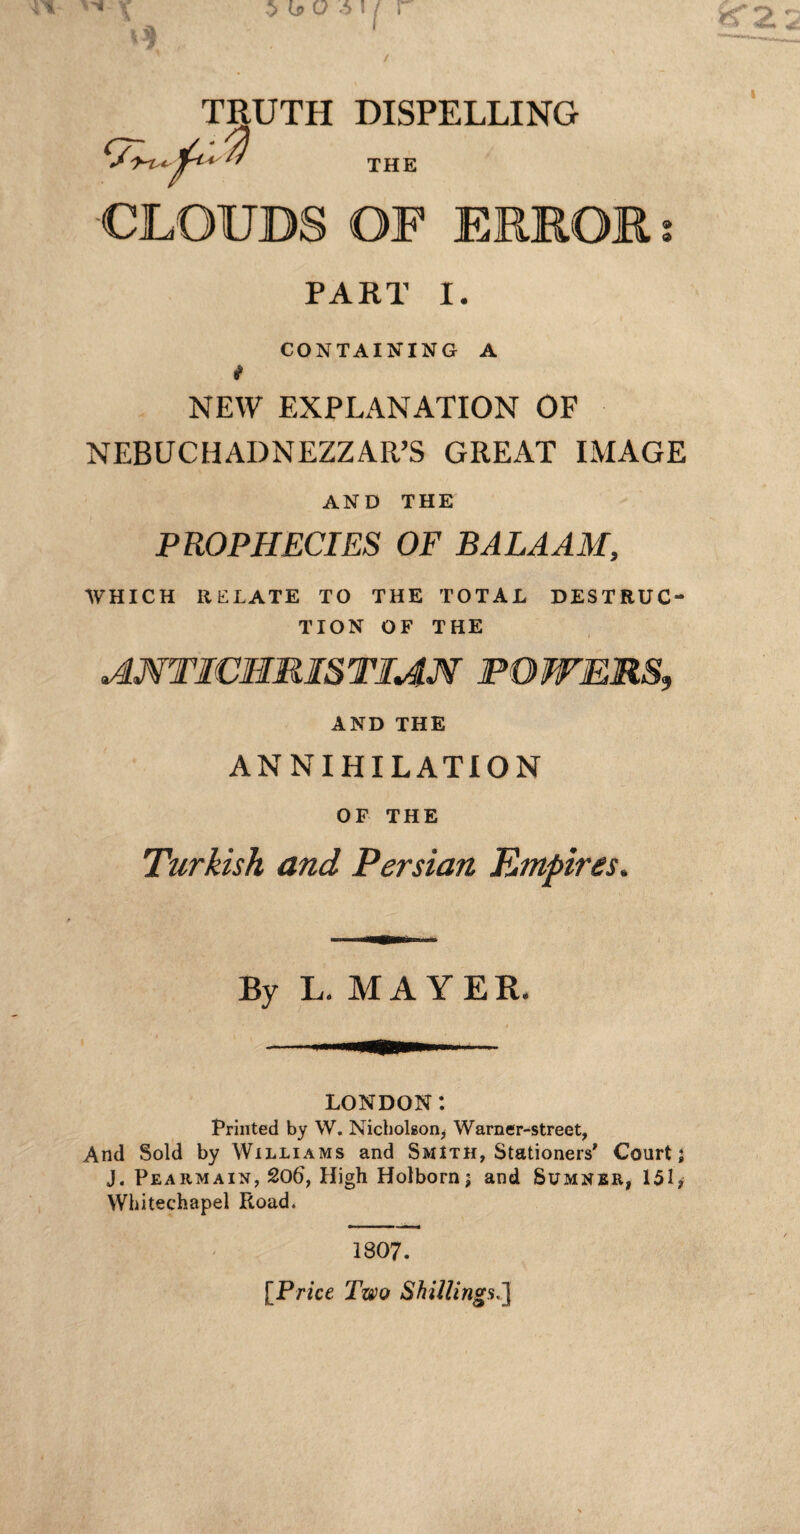 TRUTH DISPELLING I THE CLOUDS OF ERROR PART I. CONTAINING A i NEW EXPLANATION OF NEBUCHADNEZZAR’S GREAT IMAGE AND THE PROPHECIES OF BALAAM, WHICH RELATE TO THE TOTAL DESTRUC¬ TION OF THE ANTICHRISTIAN TOWERS, AND THE ANNIHILATION OF THE Turkish and Persian Empires. By L. MAYER. LONDON: Printed by W. Nicholson, Warner-street, And Sold by Williams and Smith, Stationers' Court; J. Pearmain, 206, High Holborn; and Sumner, 151, Whitechapel Road. 1807. [Price Two Shillings,']